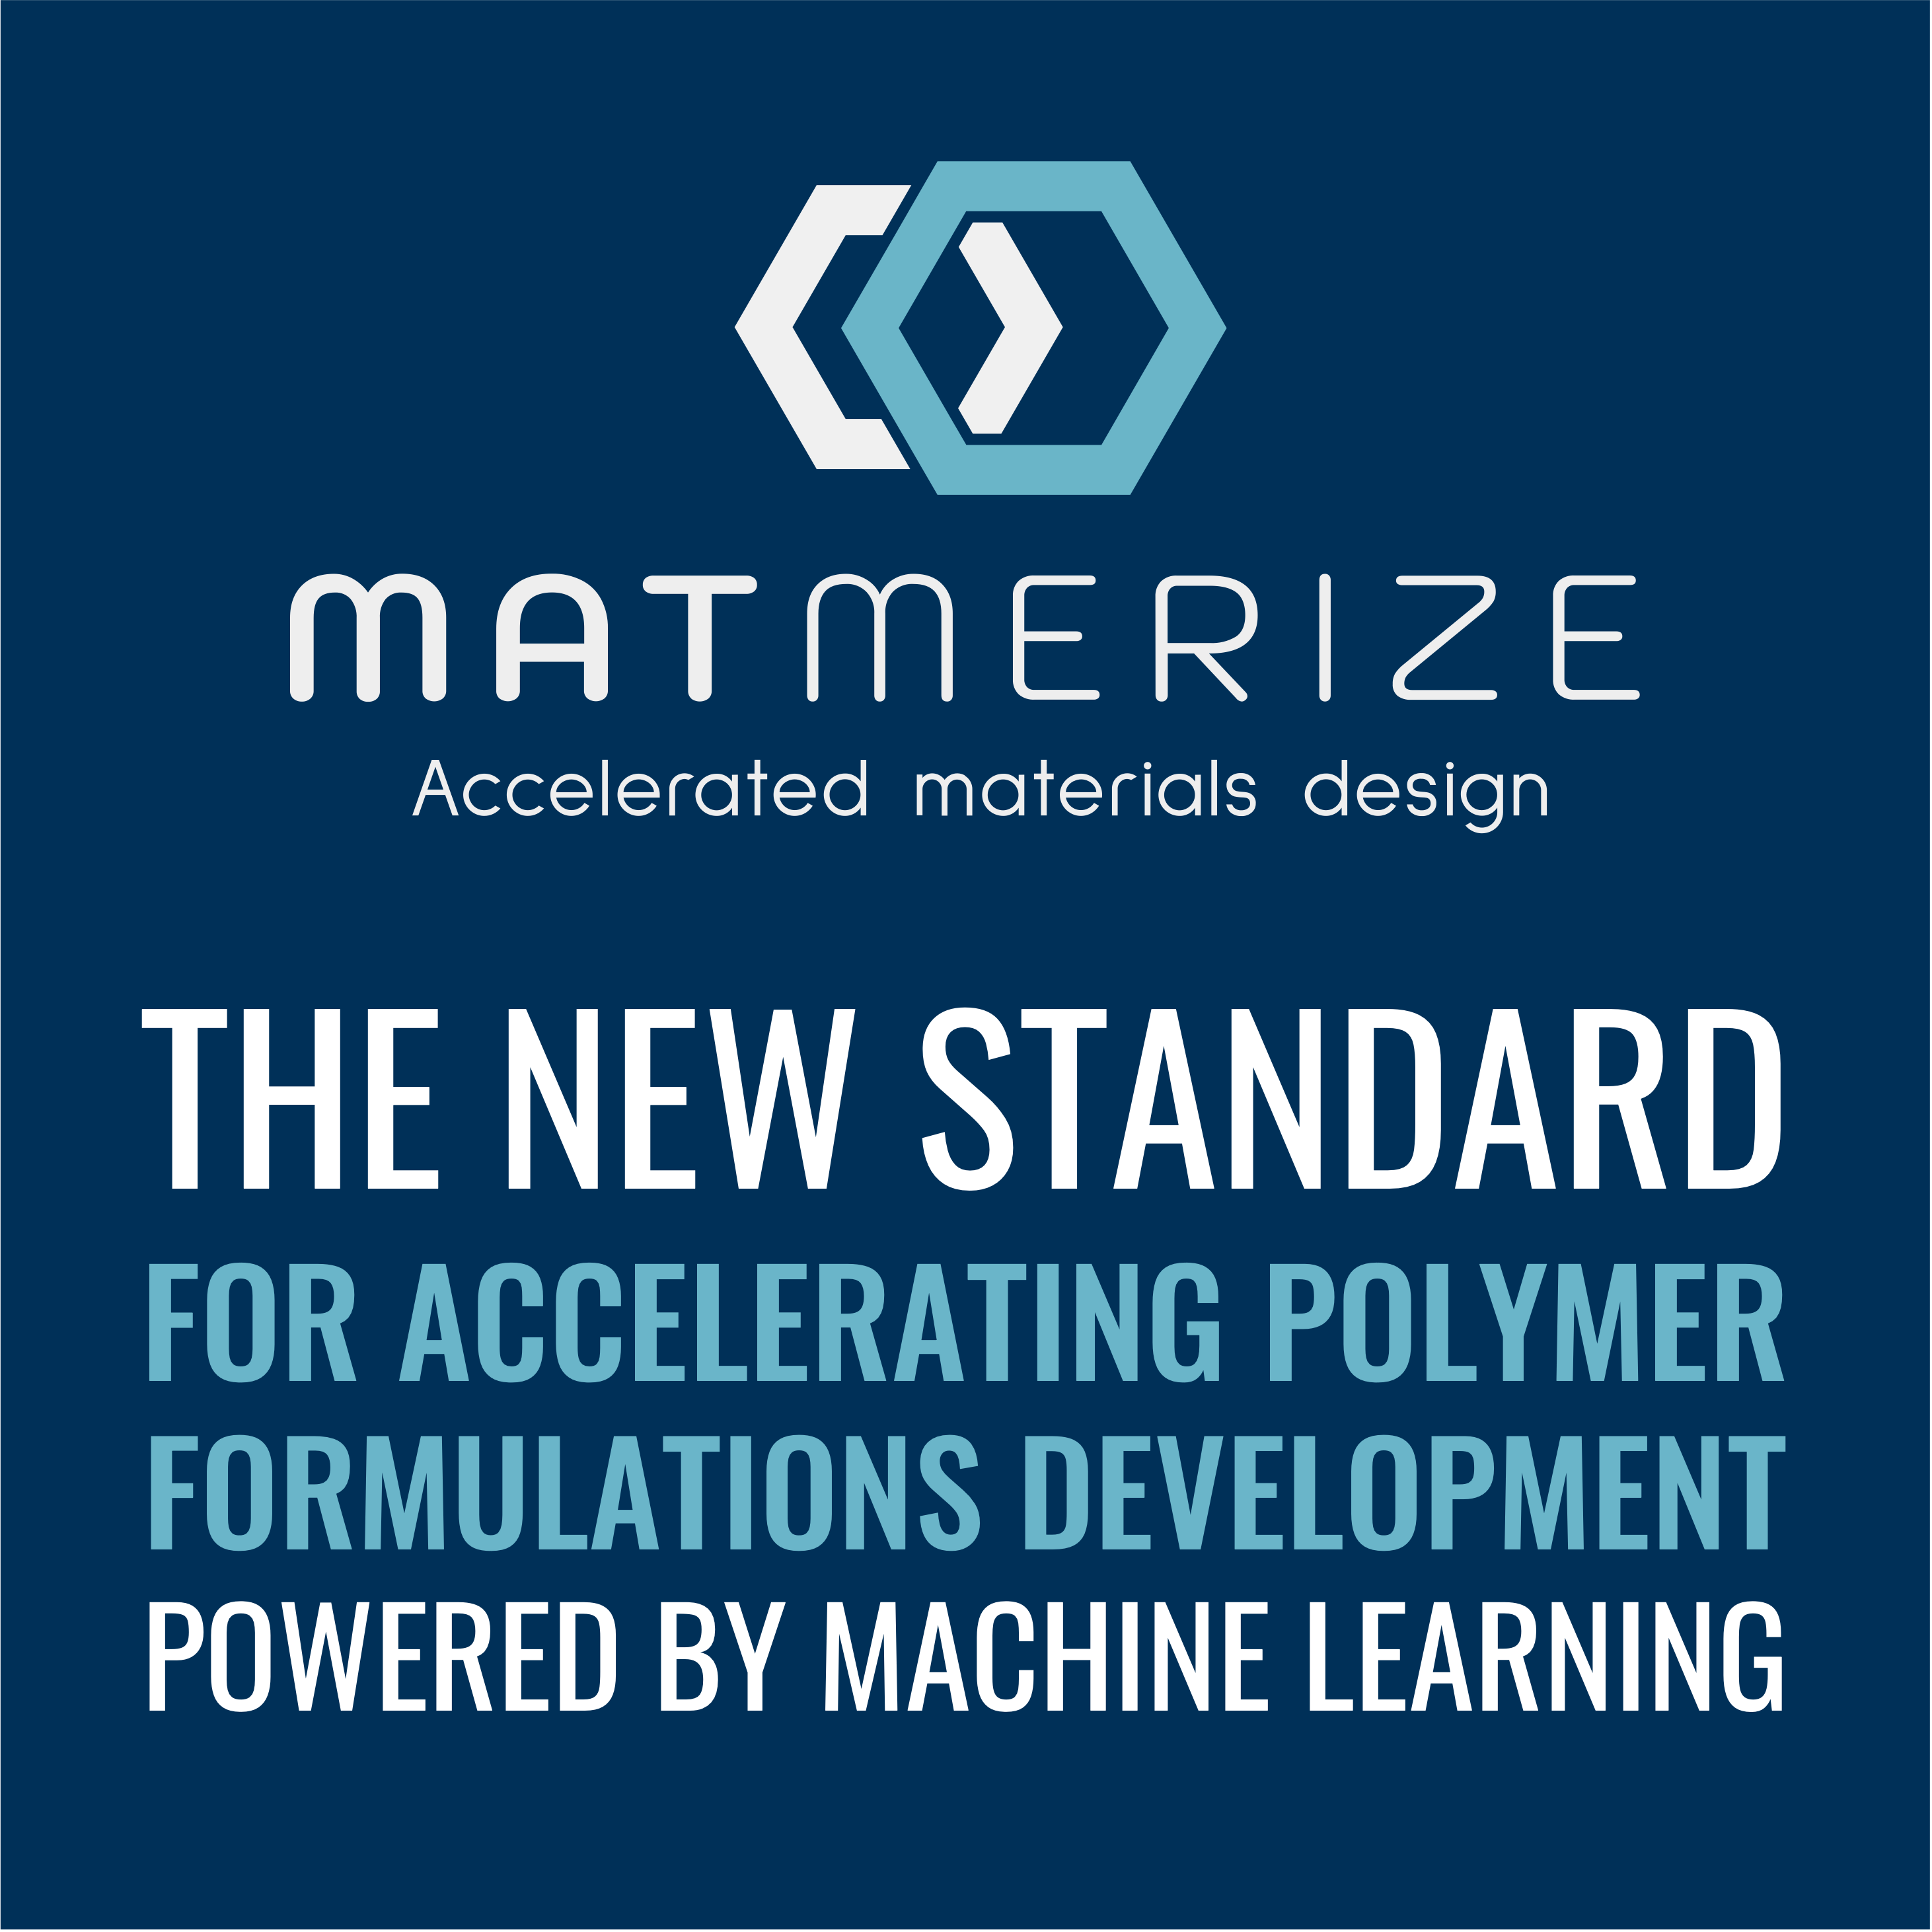 Matmerize logo with text "The new standard for accelerating polymer formulations development powered by machine learning